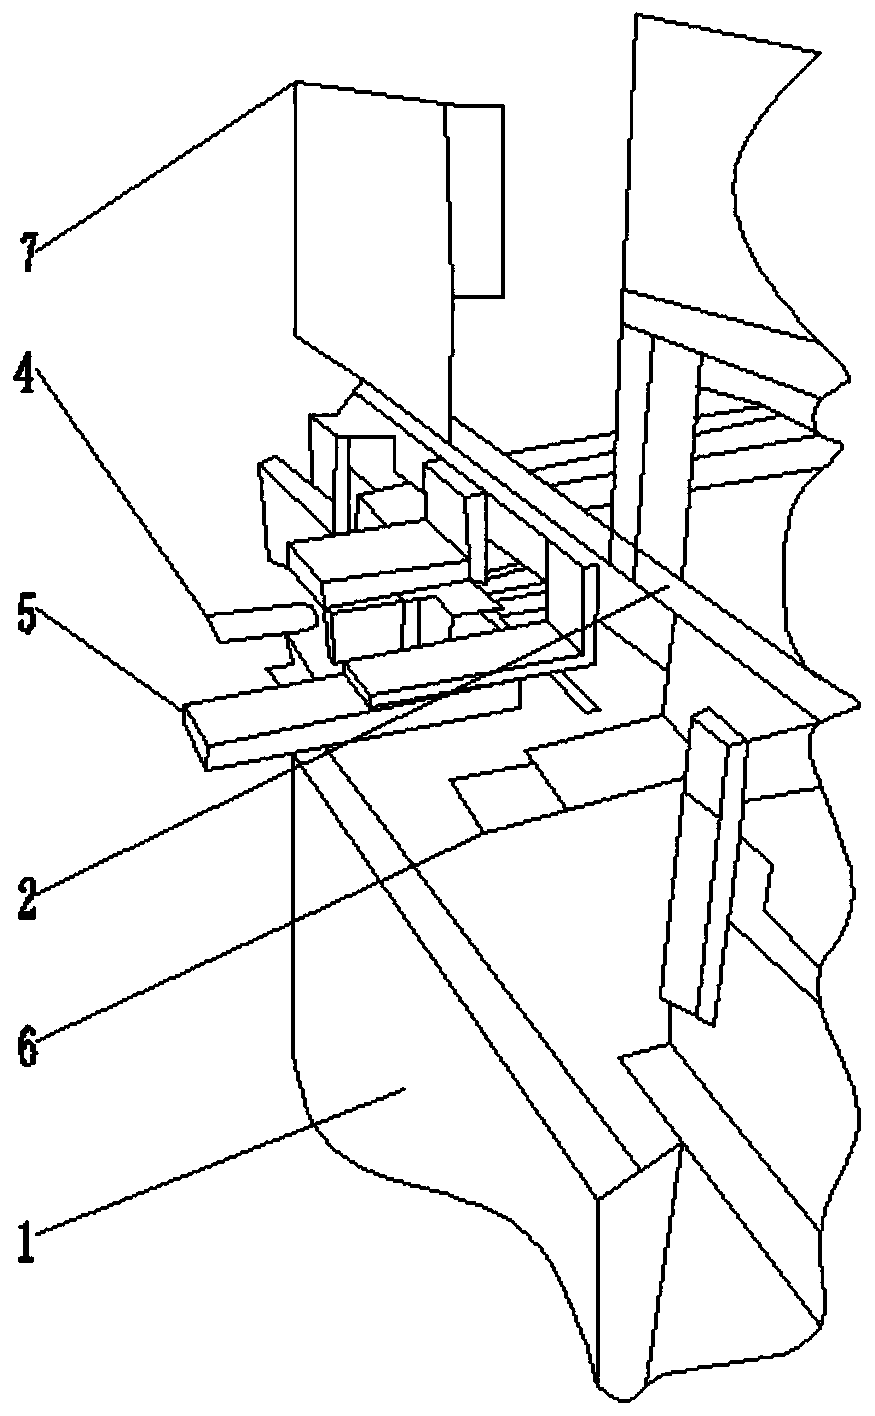 Full-automatic leakage checking and dust removing integrated equipment for serum transfer pipette